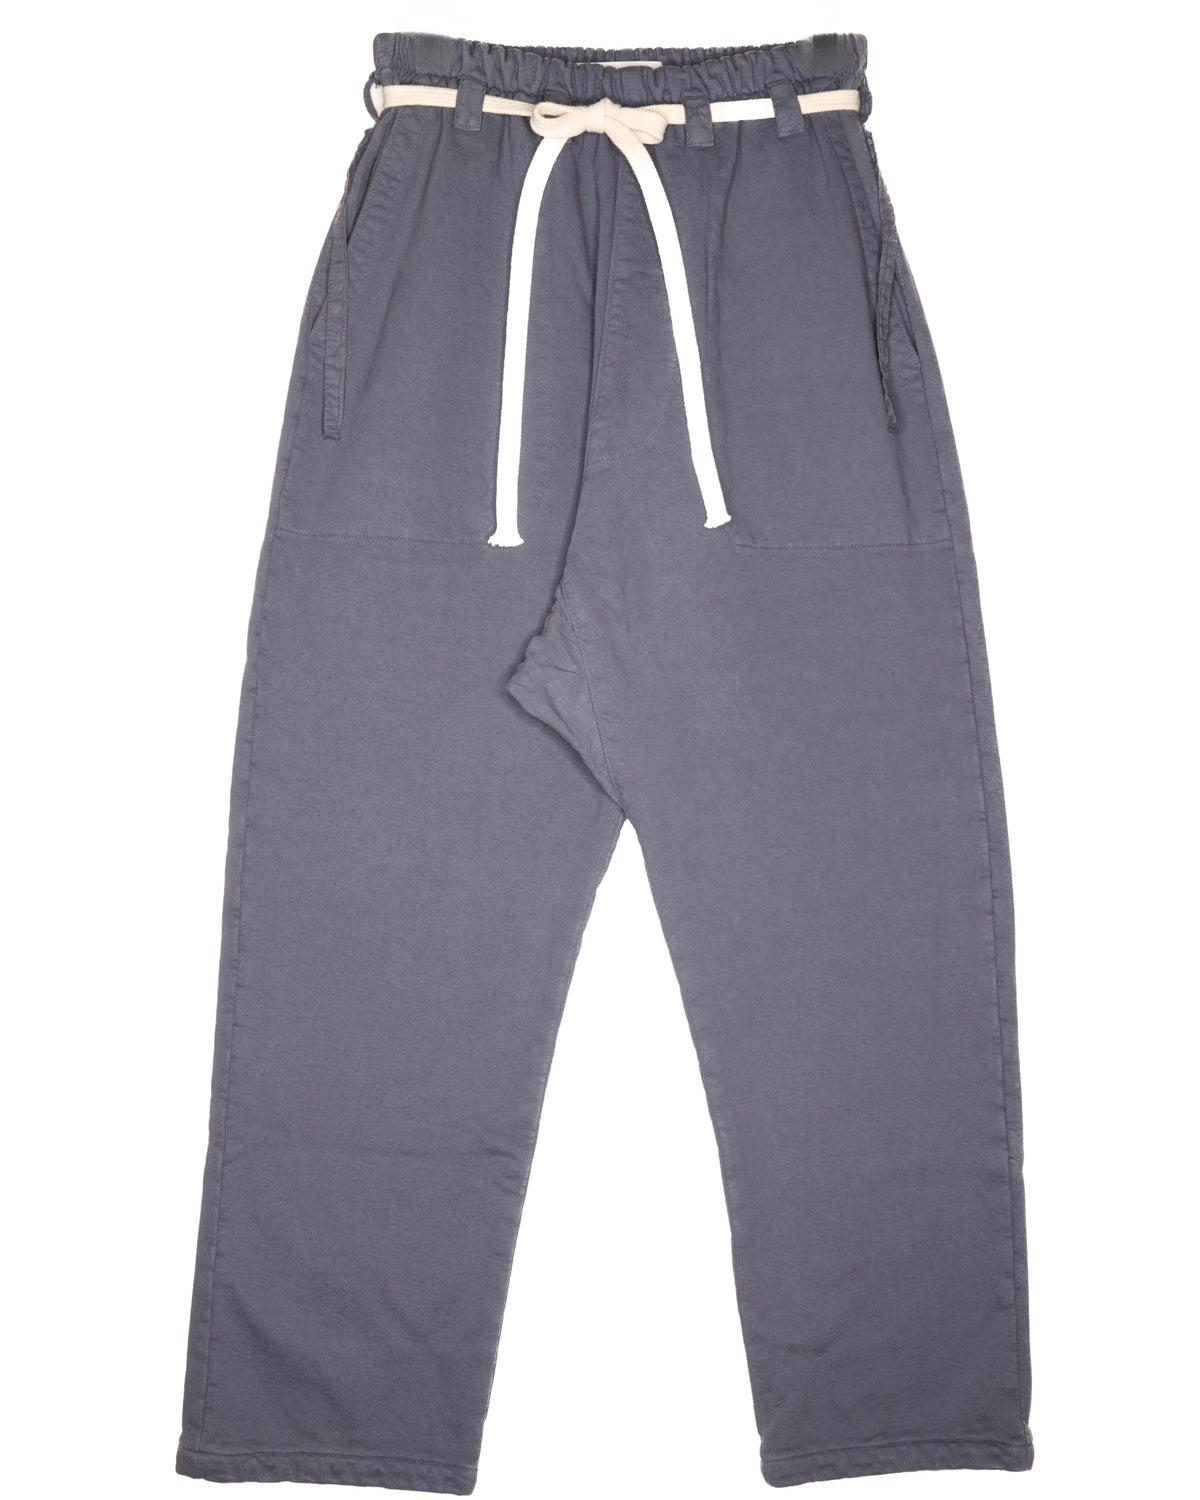 Picasso Pant in Cotton Fleece